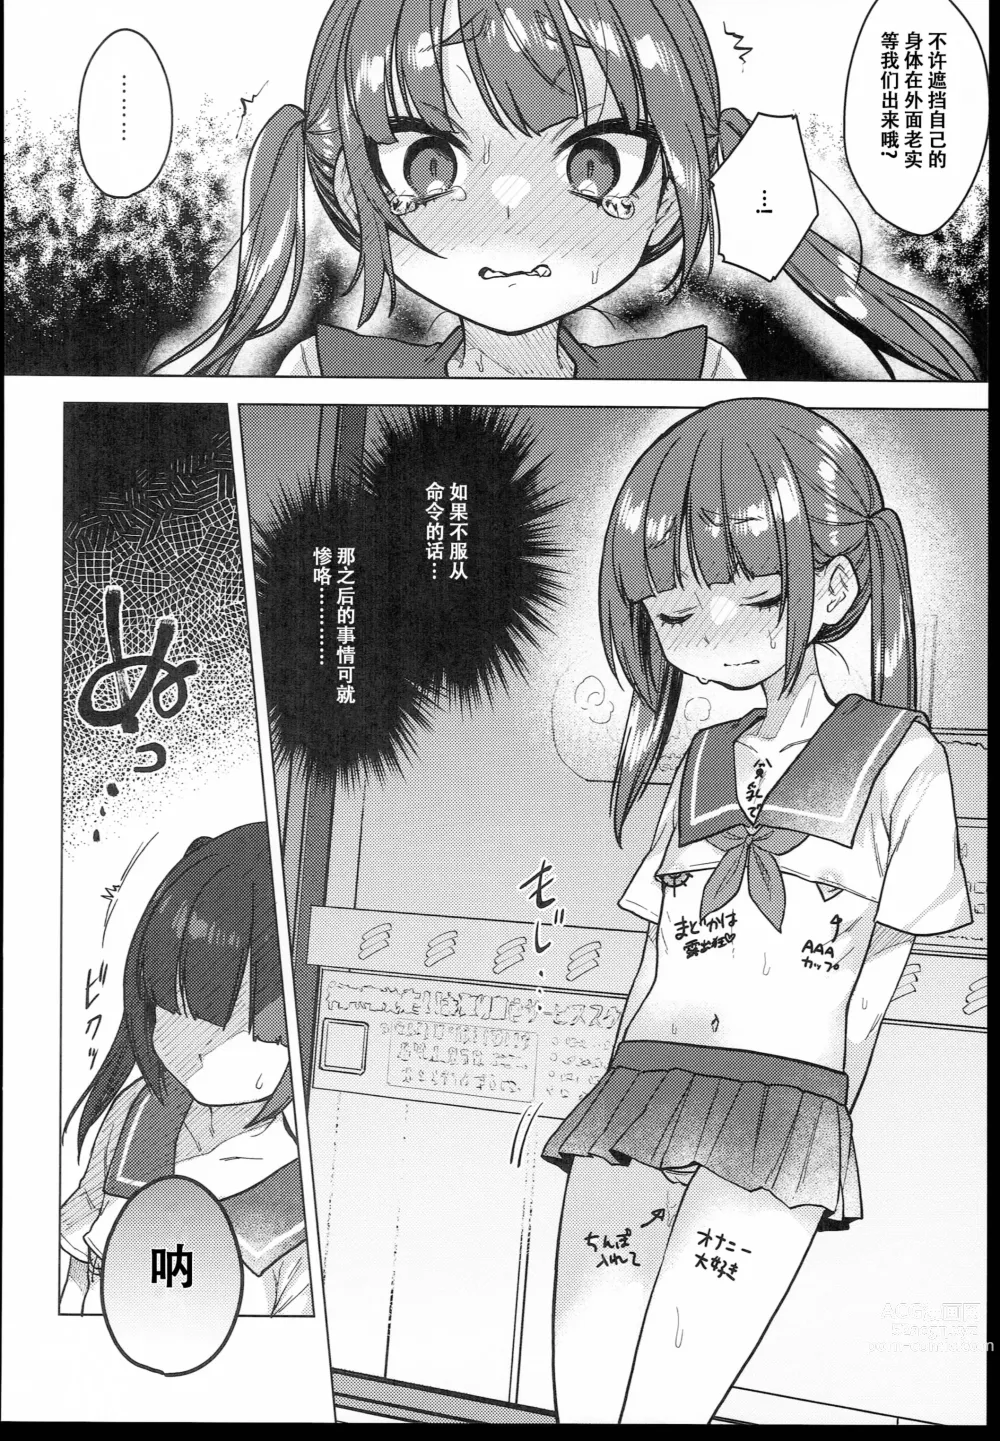 Page 18 of doujinshi 委員長は今日からみんなのオモチャ～終わった学校生活編～